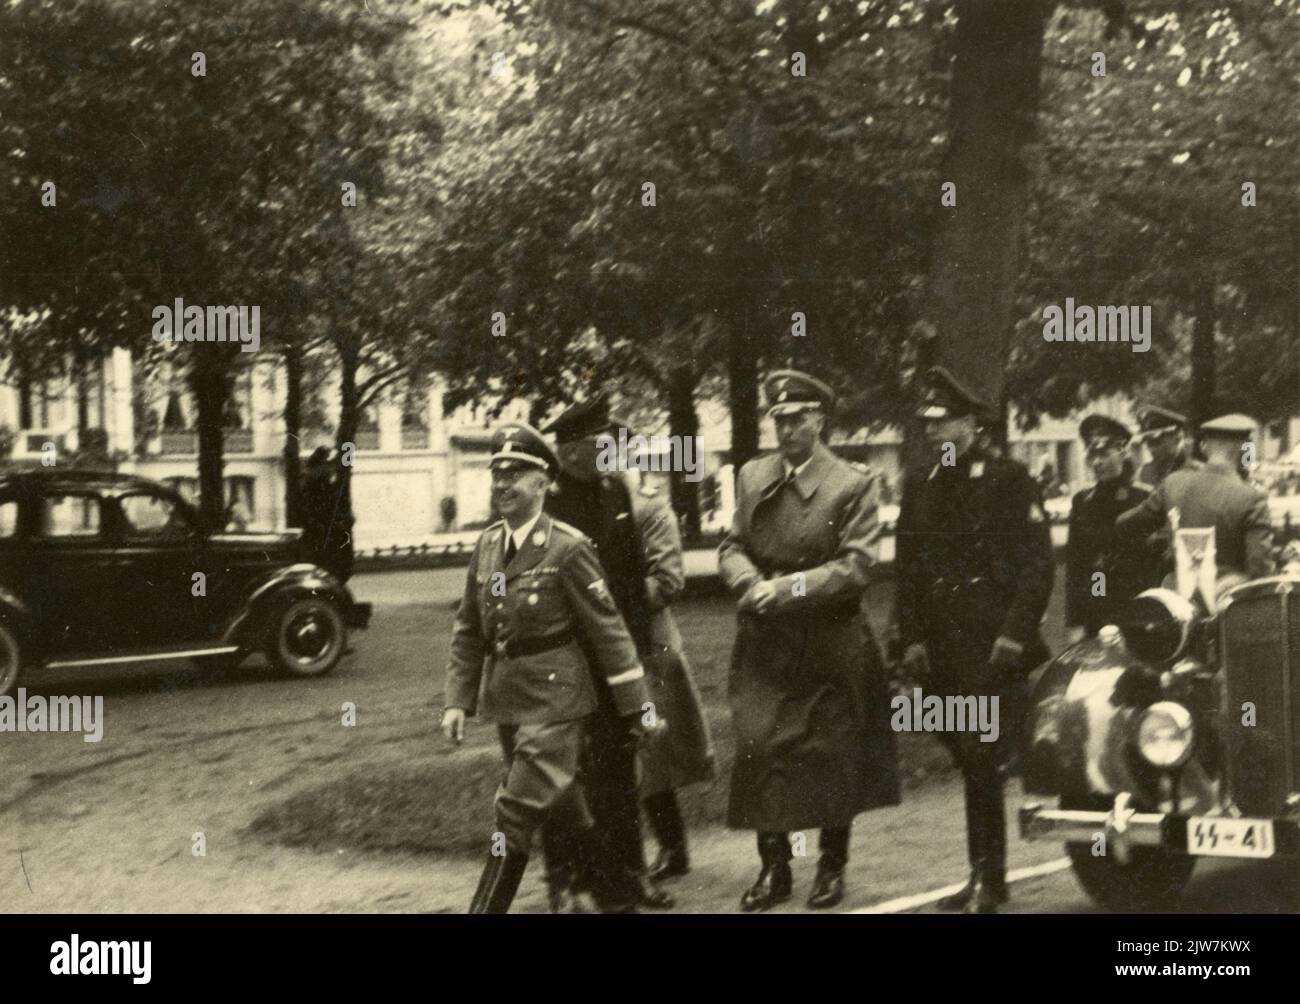 Image of the arrival of H.L. Himmler (S.S. Reichsführer) for a visit to ir. A.A. Mussert (leader of the National Socialist Movement, N.S.B.) in the headquarters of the N.S.B. (Maliebaan 35) in Utrecht, after which they will visit the Hagespraak site on the Goudsberg in Lunteren; Behind Himmler, v.l.n.r. H.A.J. Kessler (adjutant of Mussert), H.A. Rauter (Höhere SSund Polizeiführer in the Netherlands) and Jhr. D. de Blocq van Scheltinga (head of General Affairs Office of the N.S.B.). Stock Photo